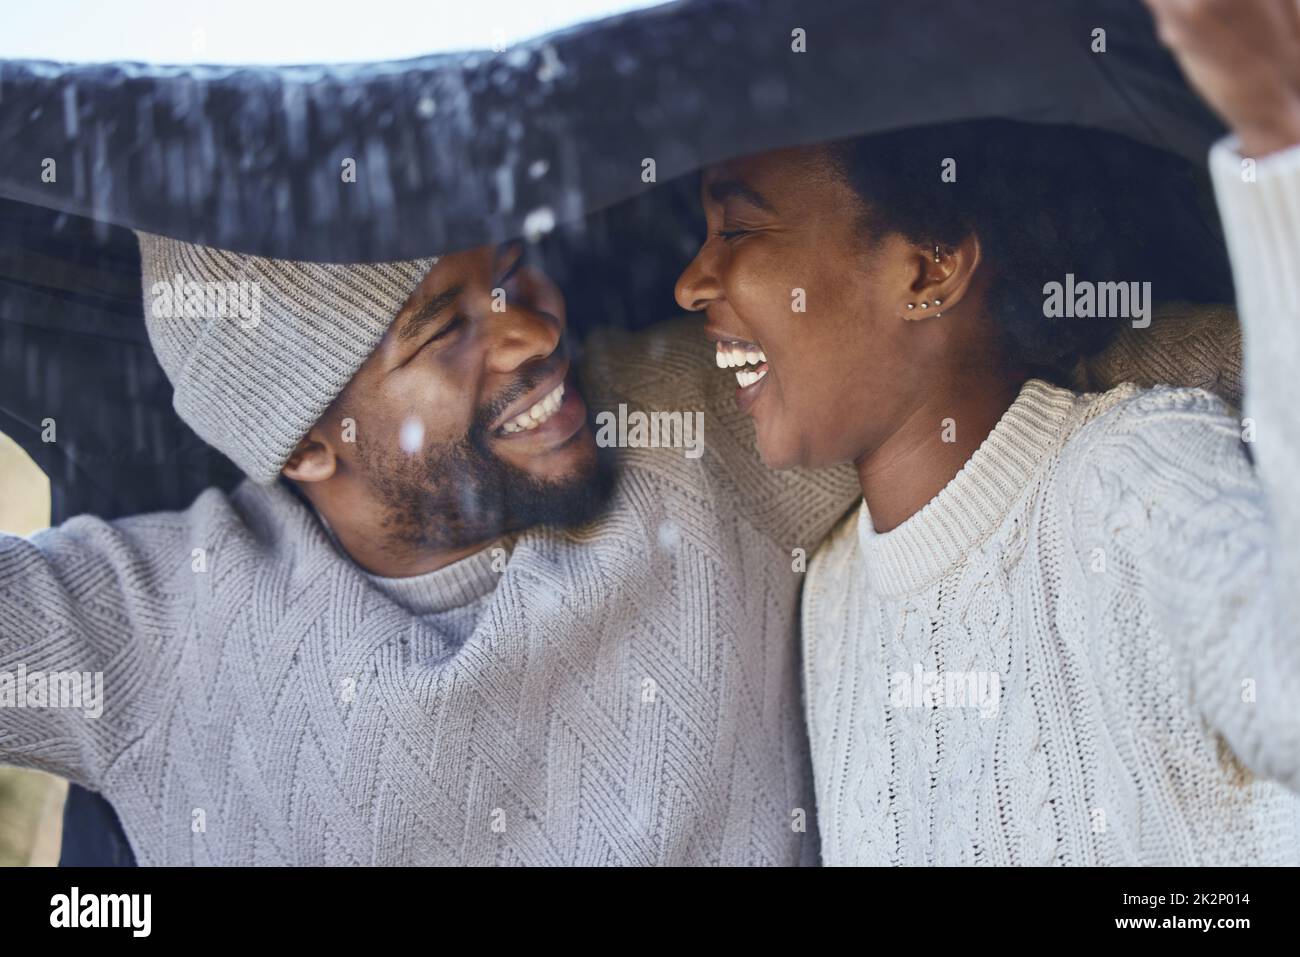 Baby its cold outside. Shot of a young couple protecting themselves from the rain. Stock Photo